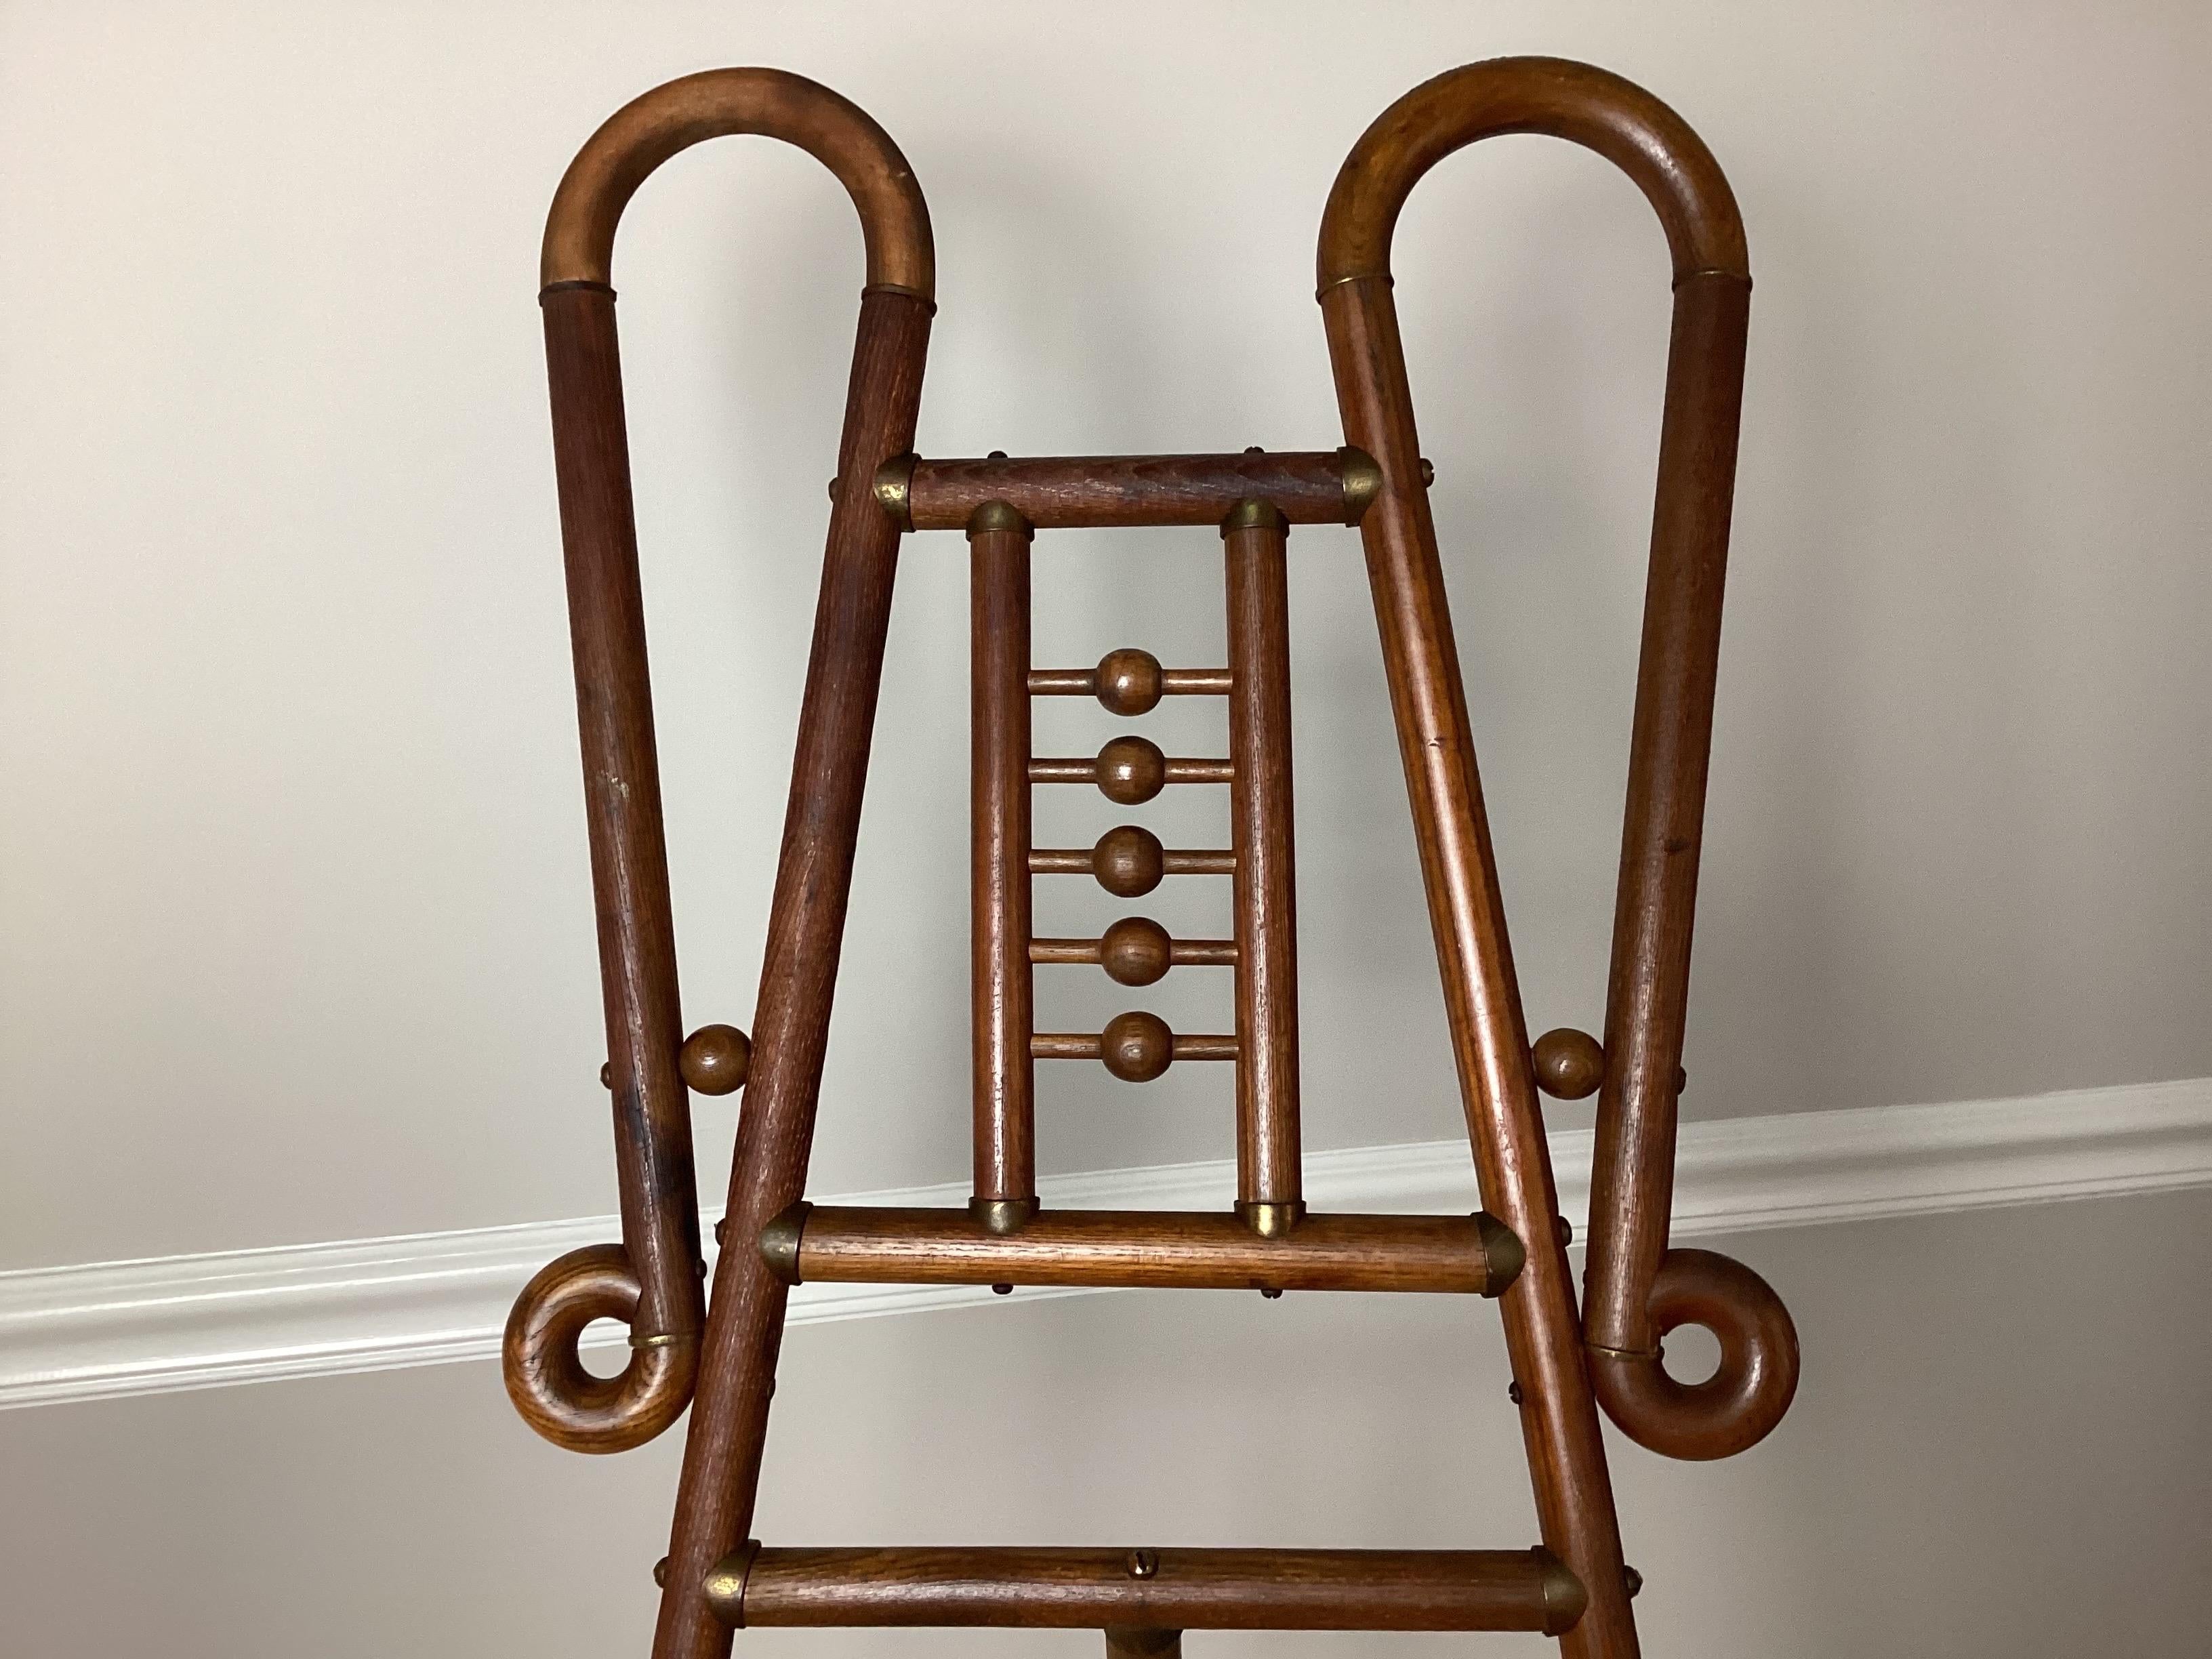 Victorian Aesthetic Movement Style Bentwood Art Easel. Brass mounts. 62” tall by 20”. Closed 4” deep fully open 31”. Easel back leg has a little warp to it but works just fine.